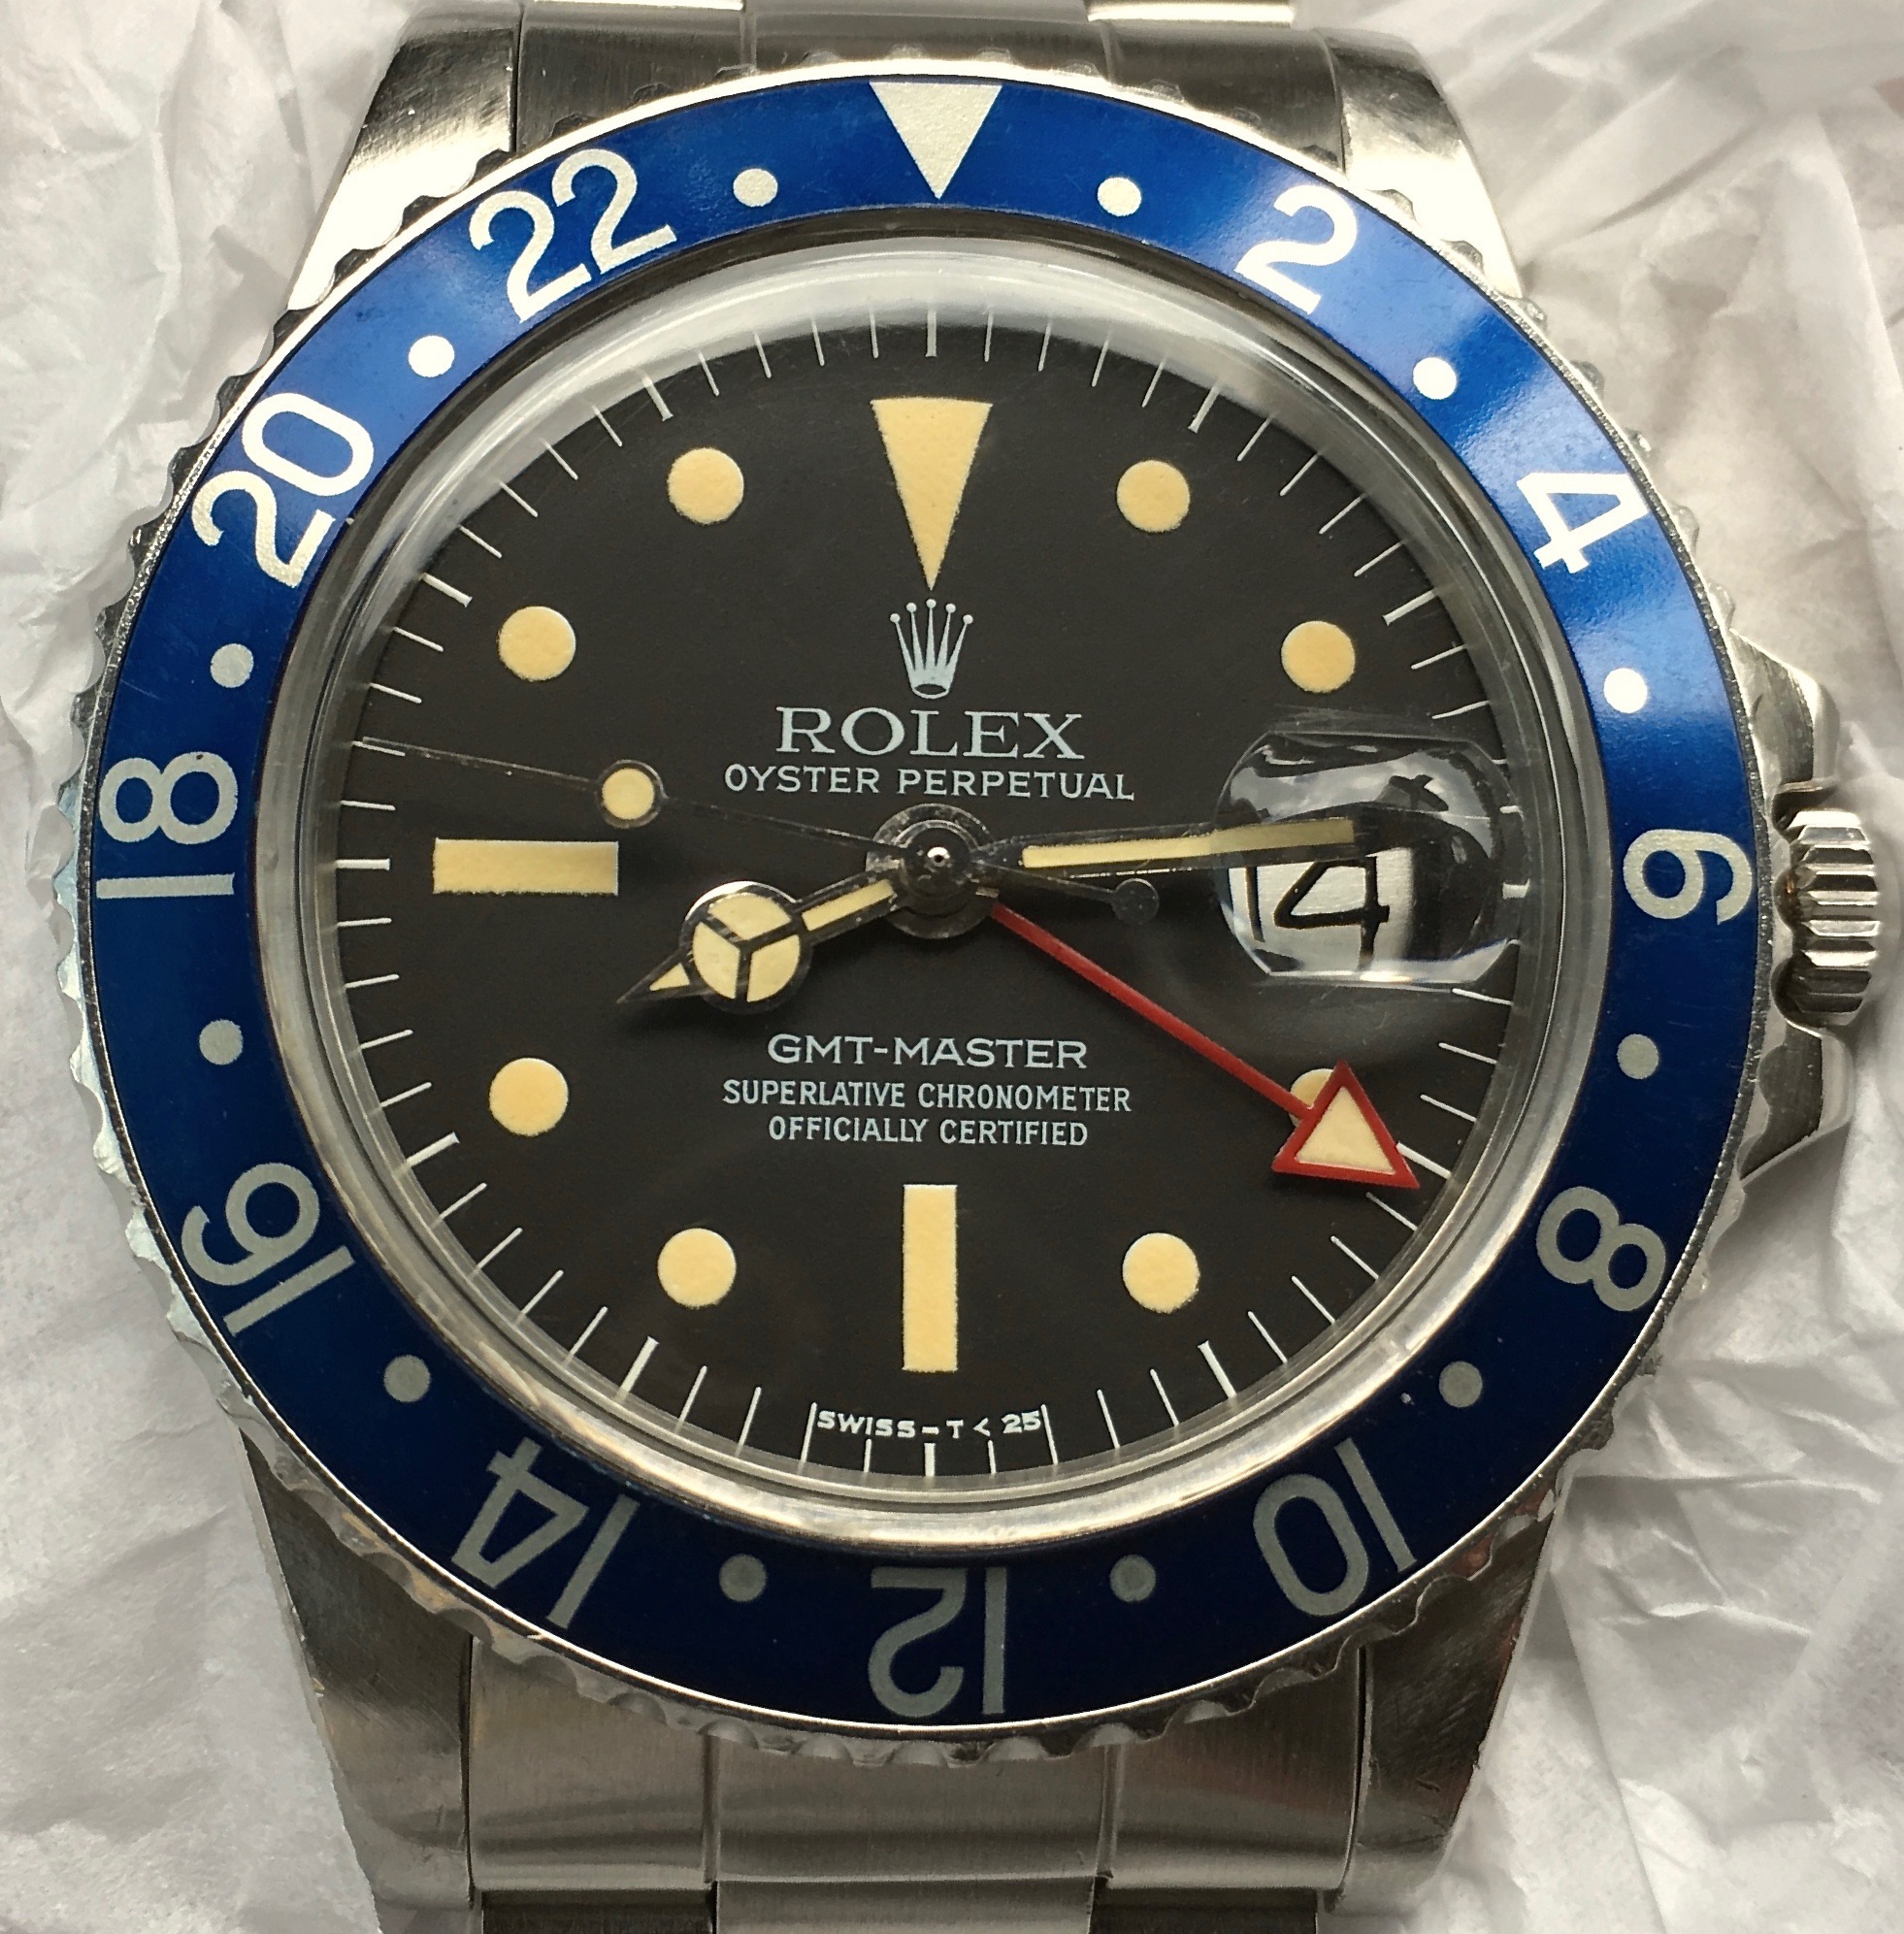 rolex with red second hand